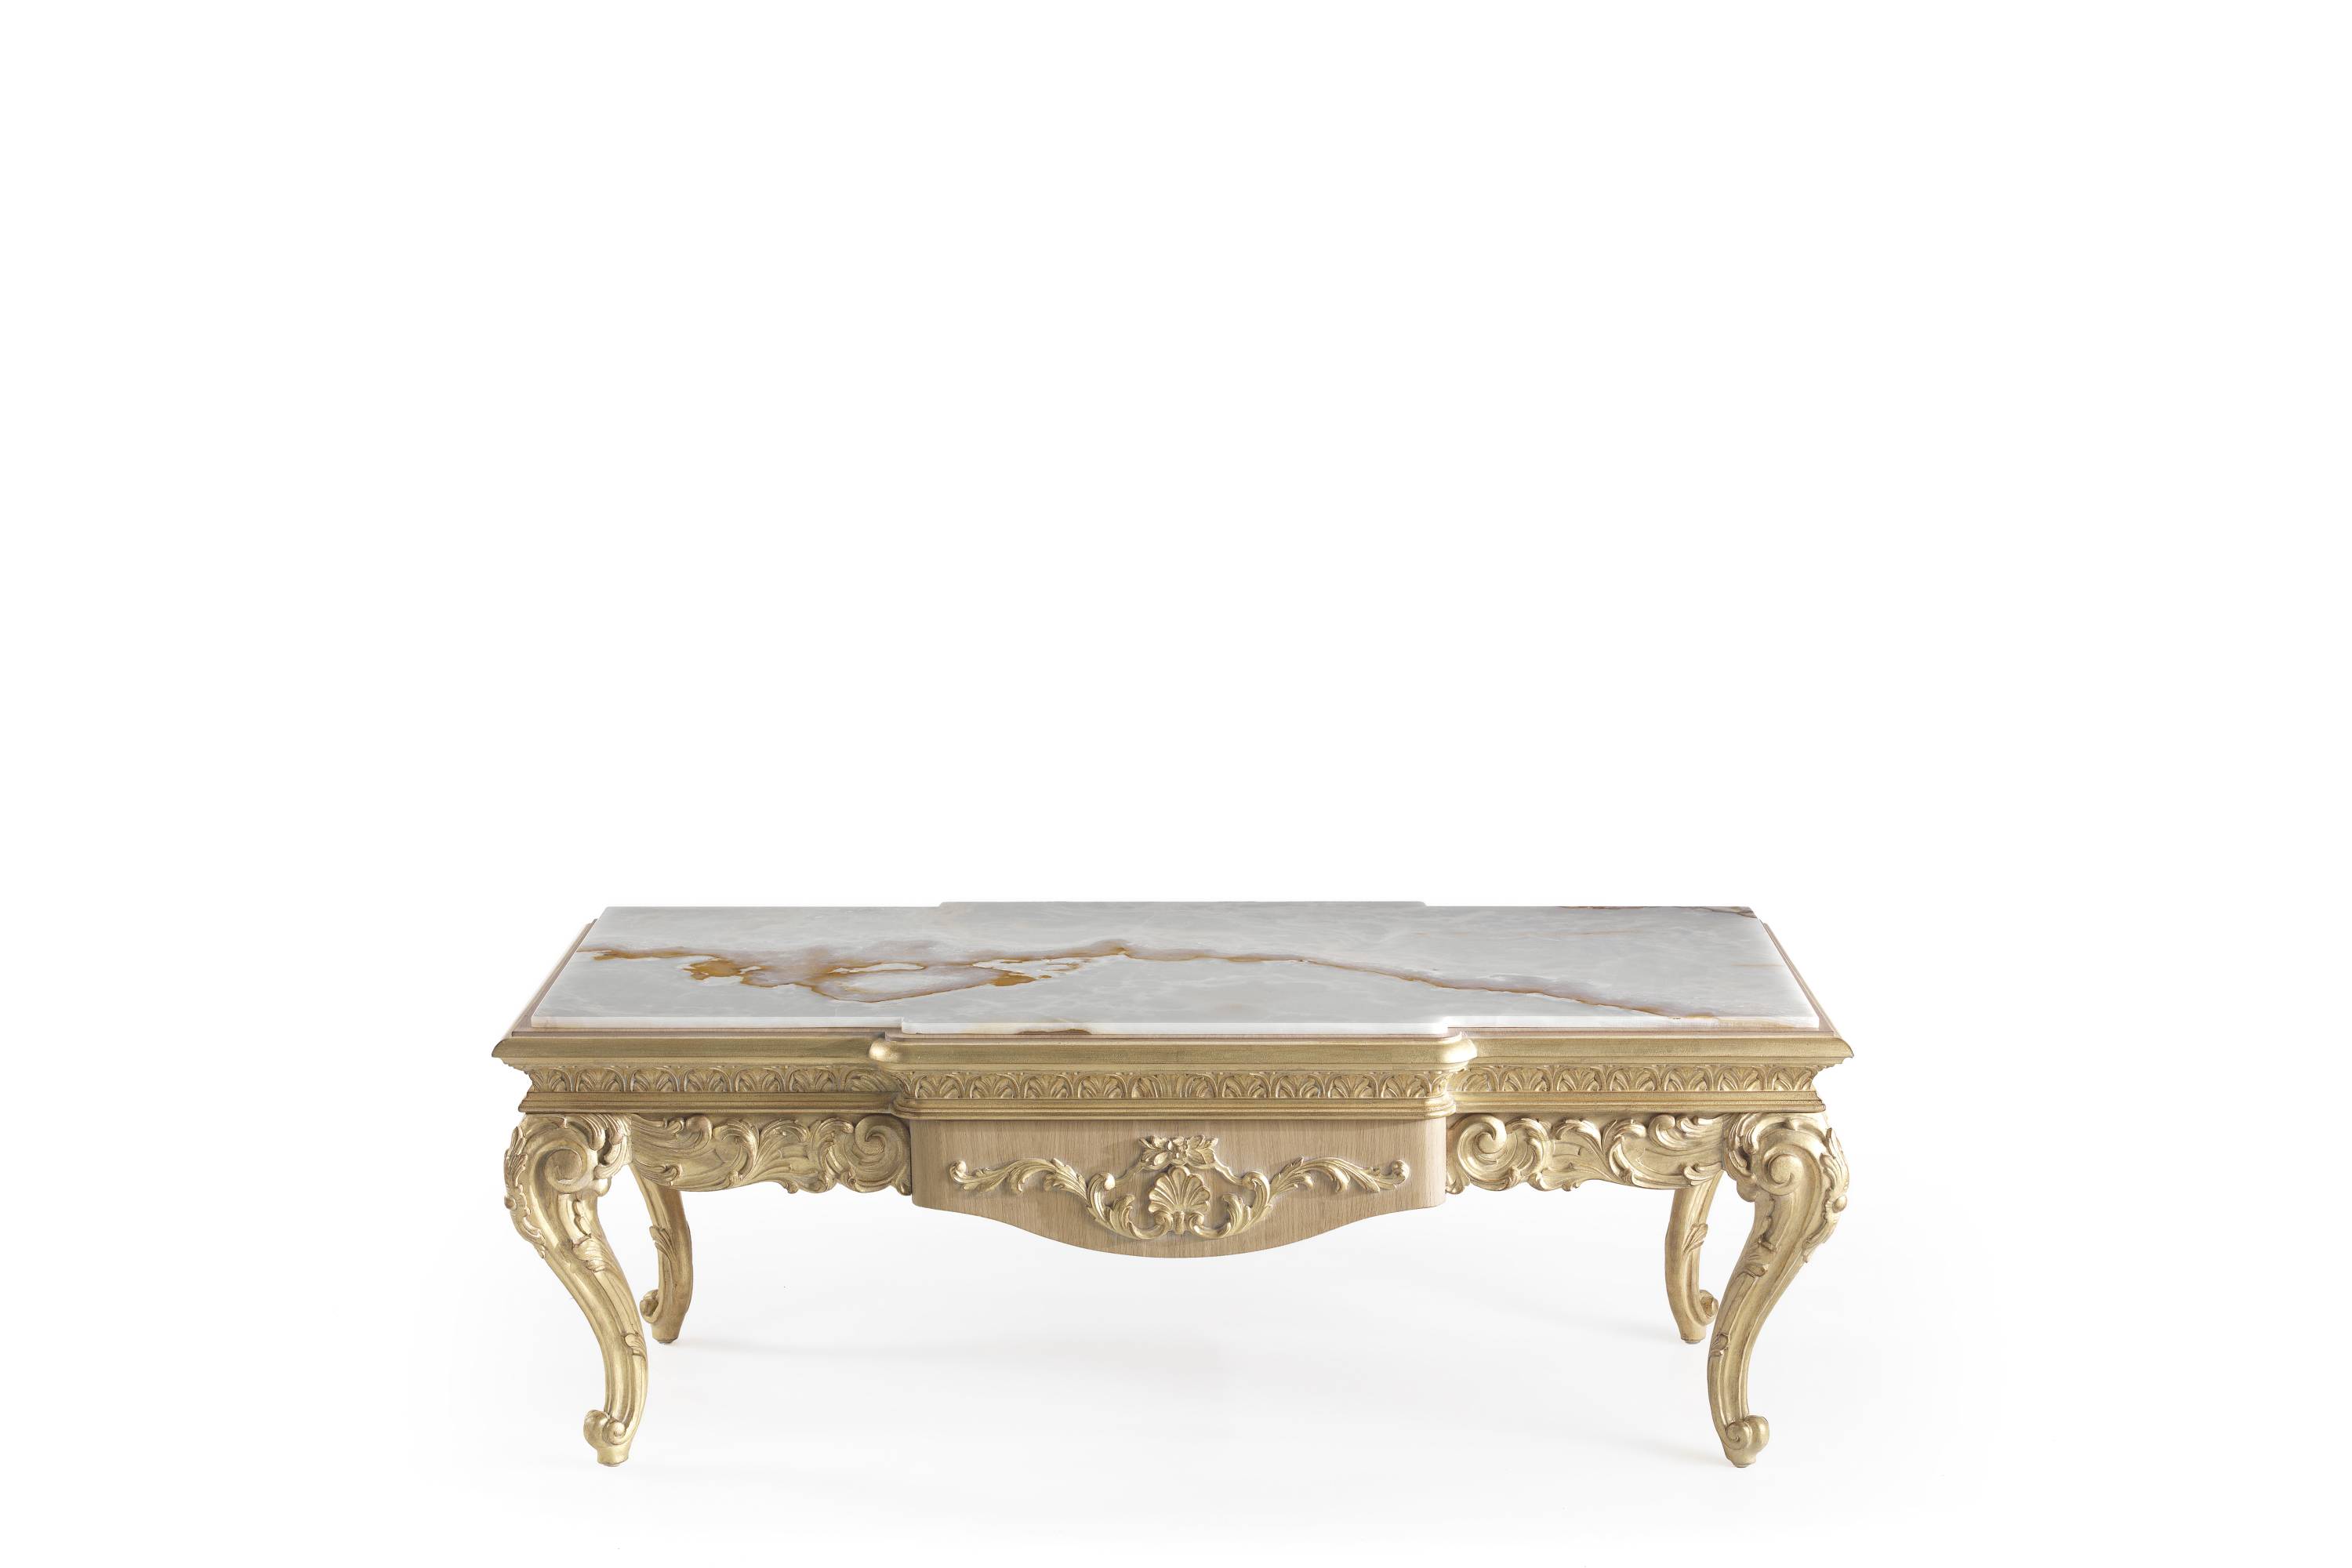 SCARLETT low table – Transform your space with sophisticated Made in Italy classic low tables.